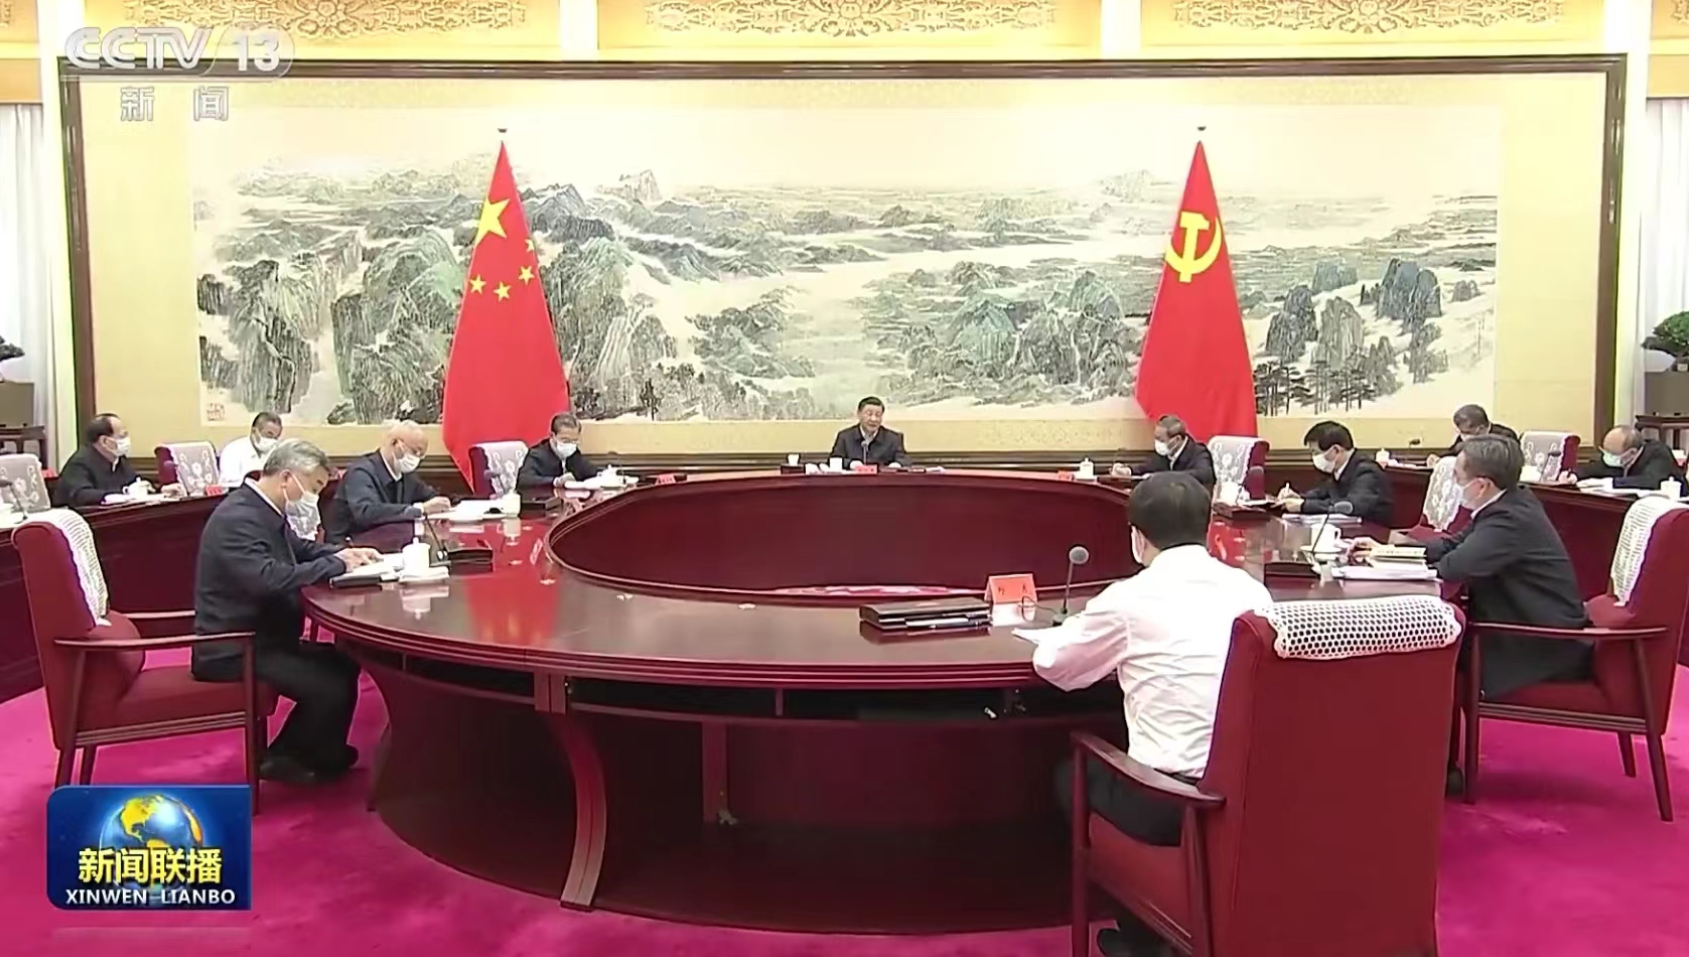 Xi stresses accelerated efforts to build leading country in education